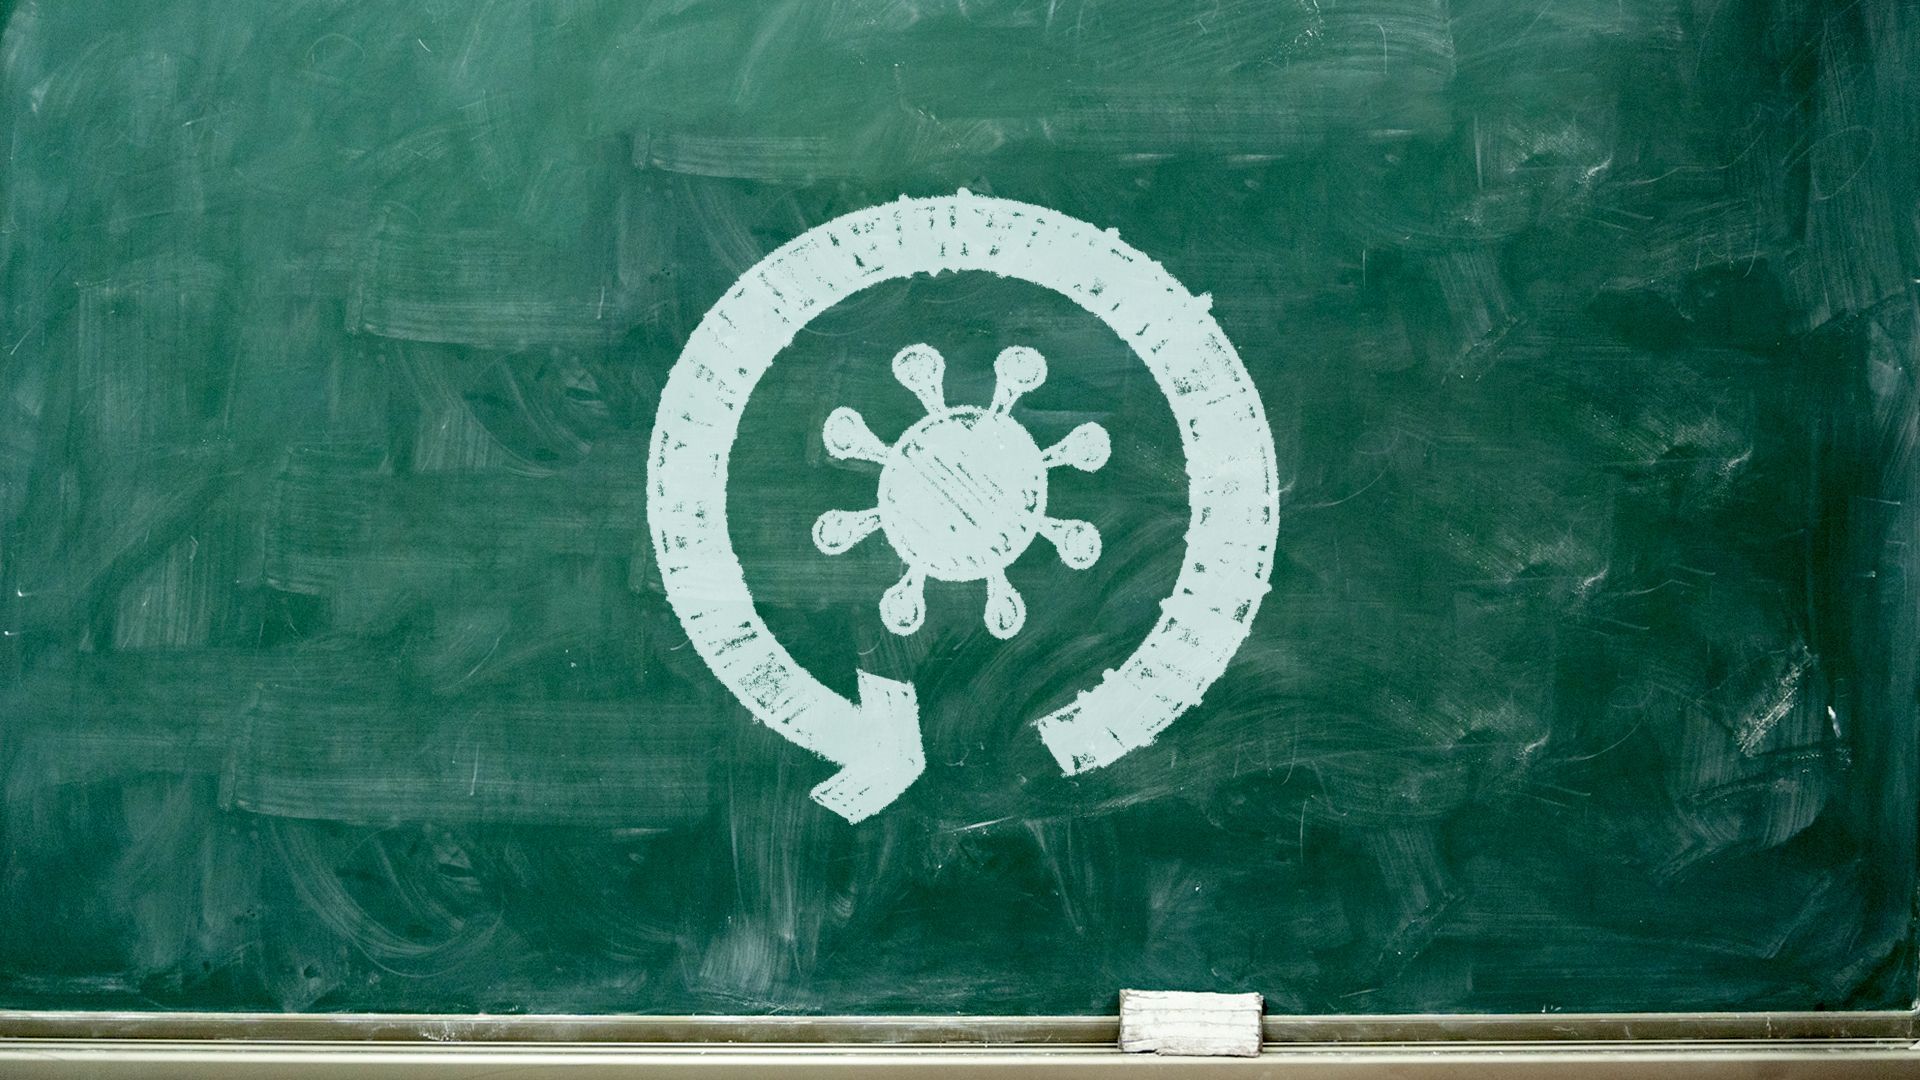 Illustration of a chalkboard with a circular arrow and a coronavirus icon drawn in chalk.